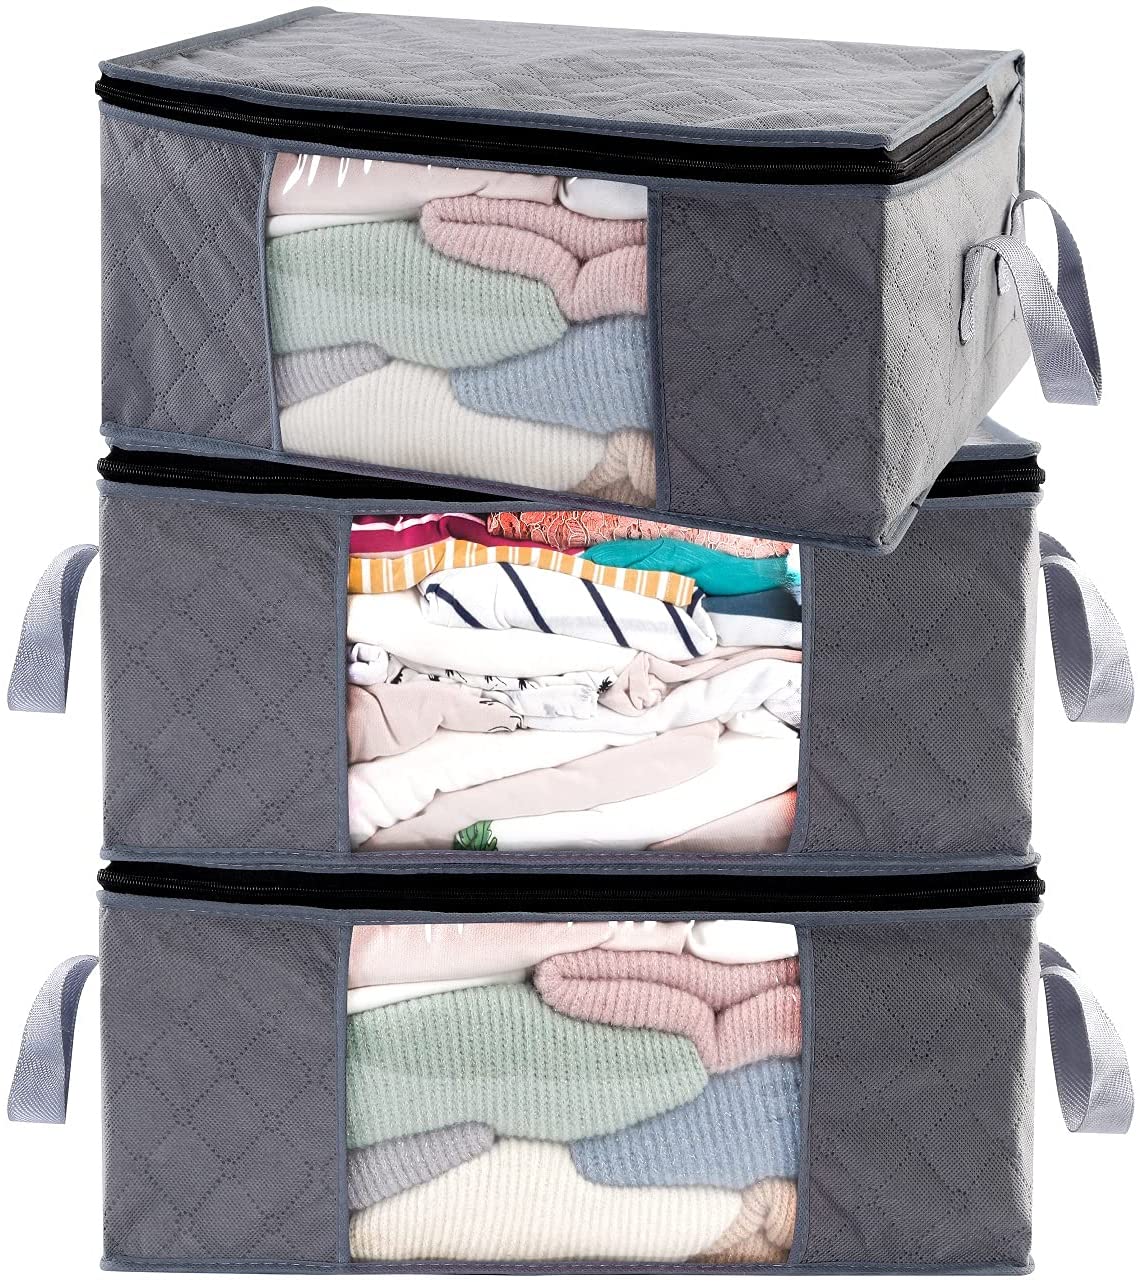 ABO Gear Clothes Storage Containers, 3pc Pack